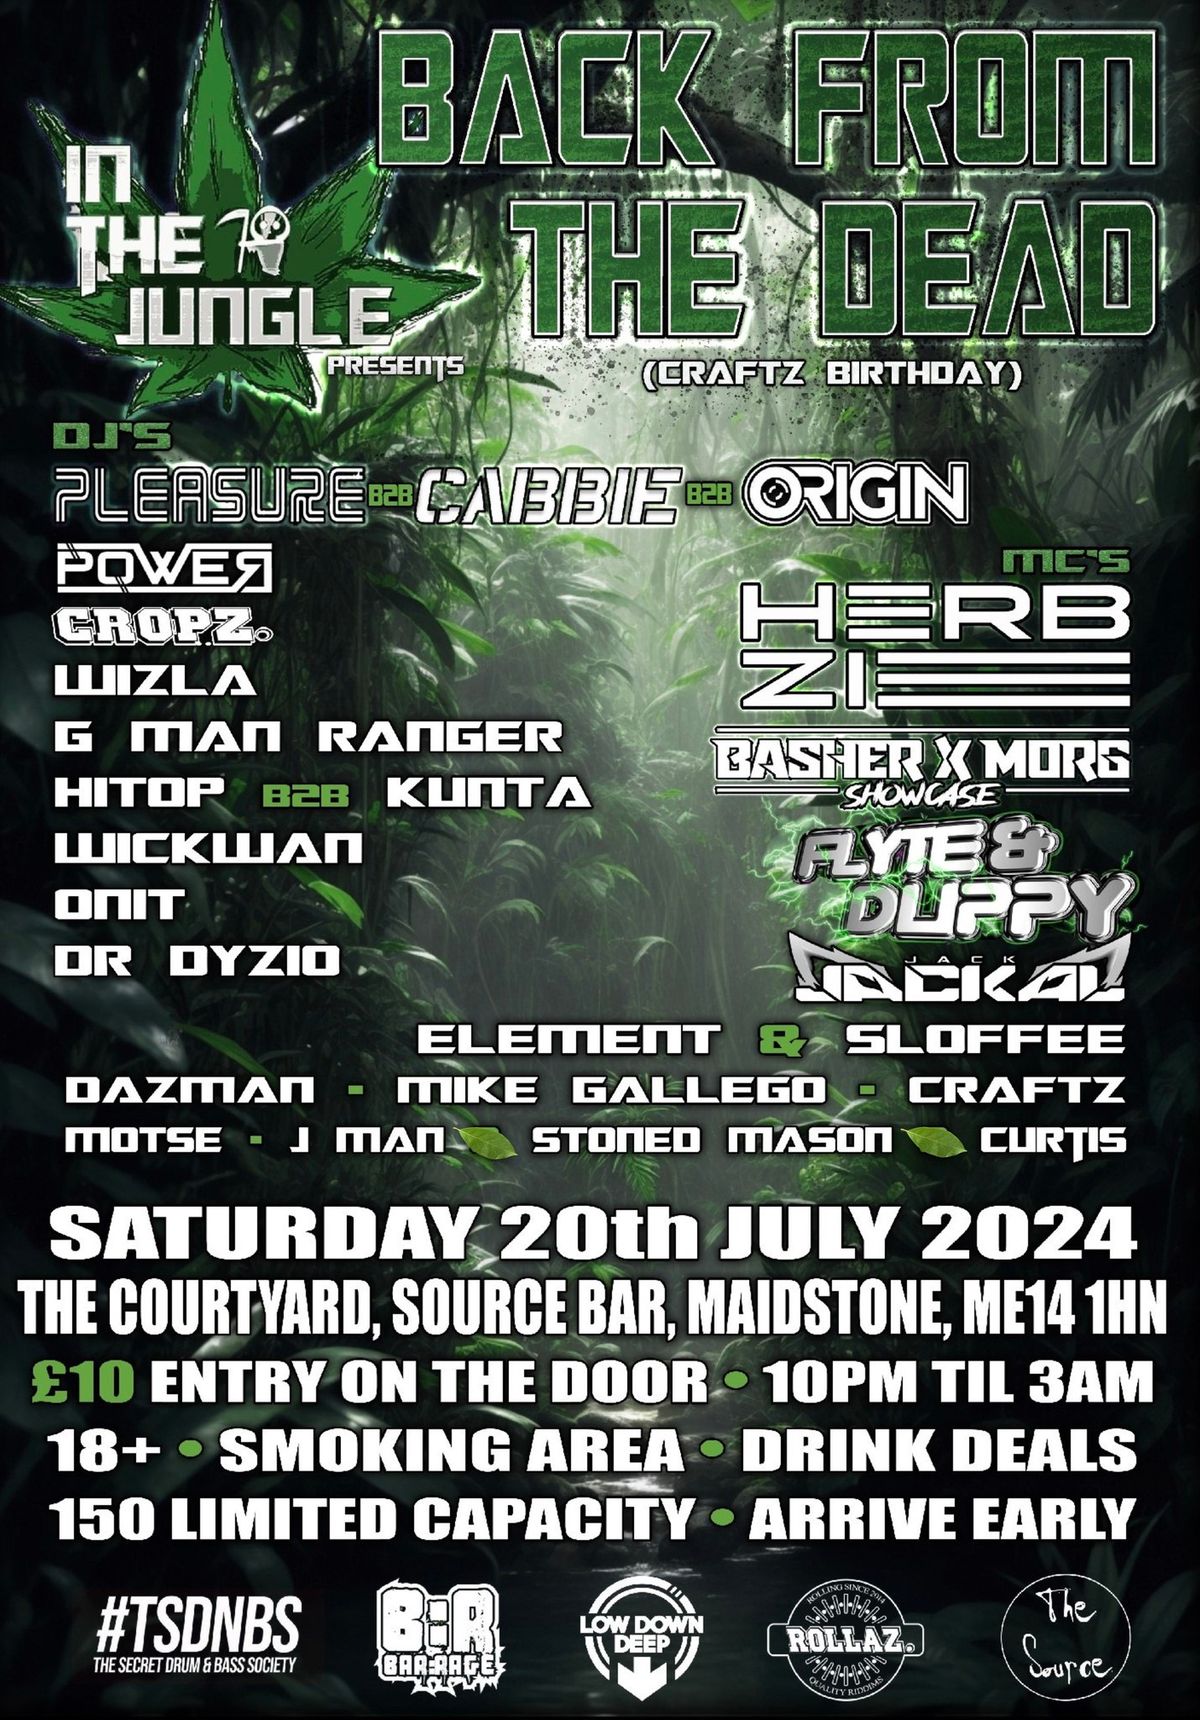 ITJ PRESENTS: BACK FROM THE DEAD! PLEASURE HERBZIE CABBIE ORIGIN BASHER MORG FLYTE DUPPY